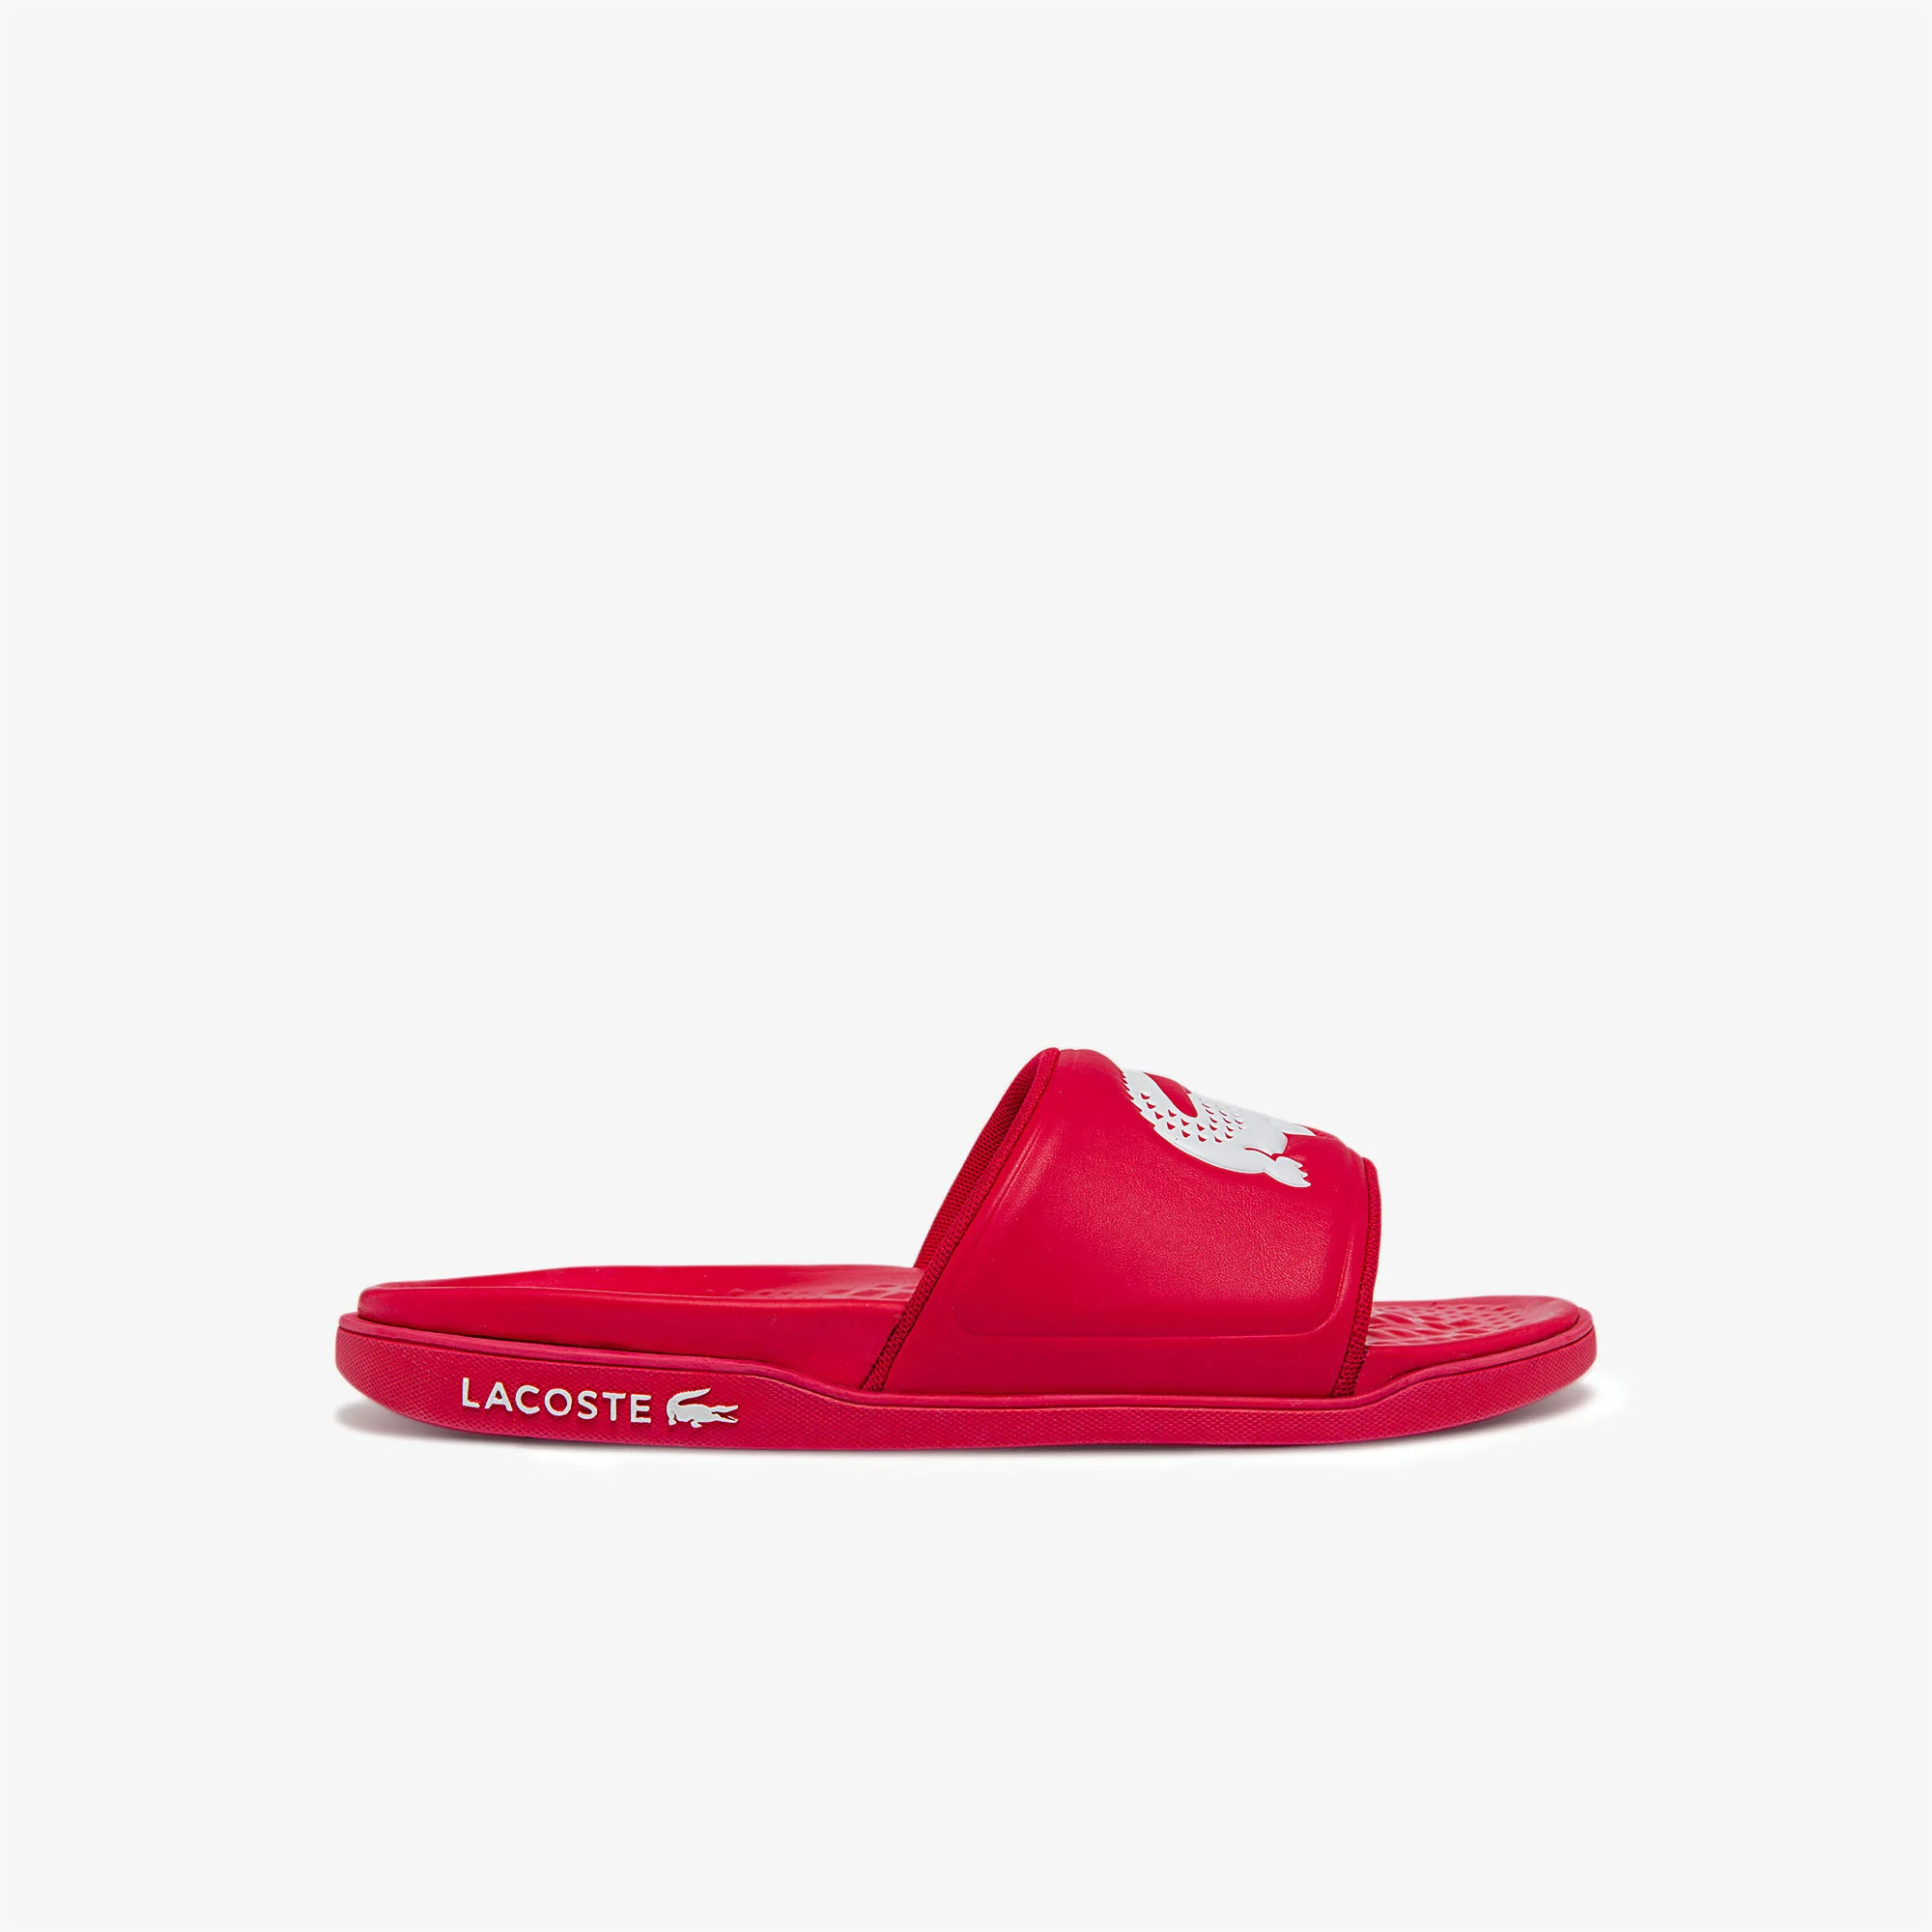 Lacoste Croco Dualiste 0922 RED/WHITE Synthetic